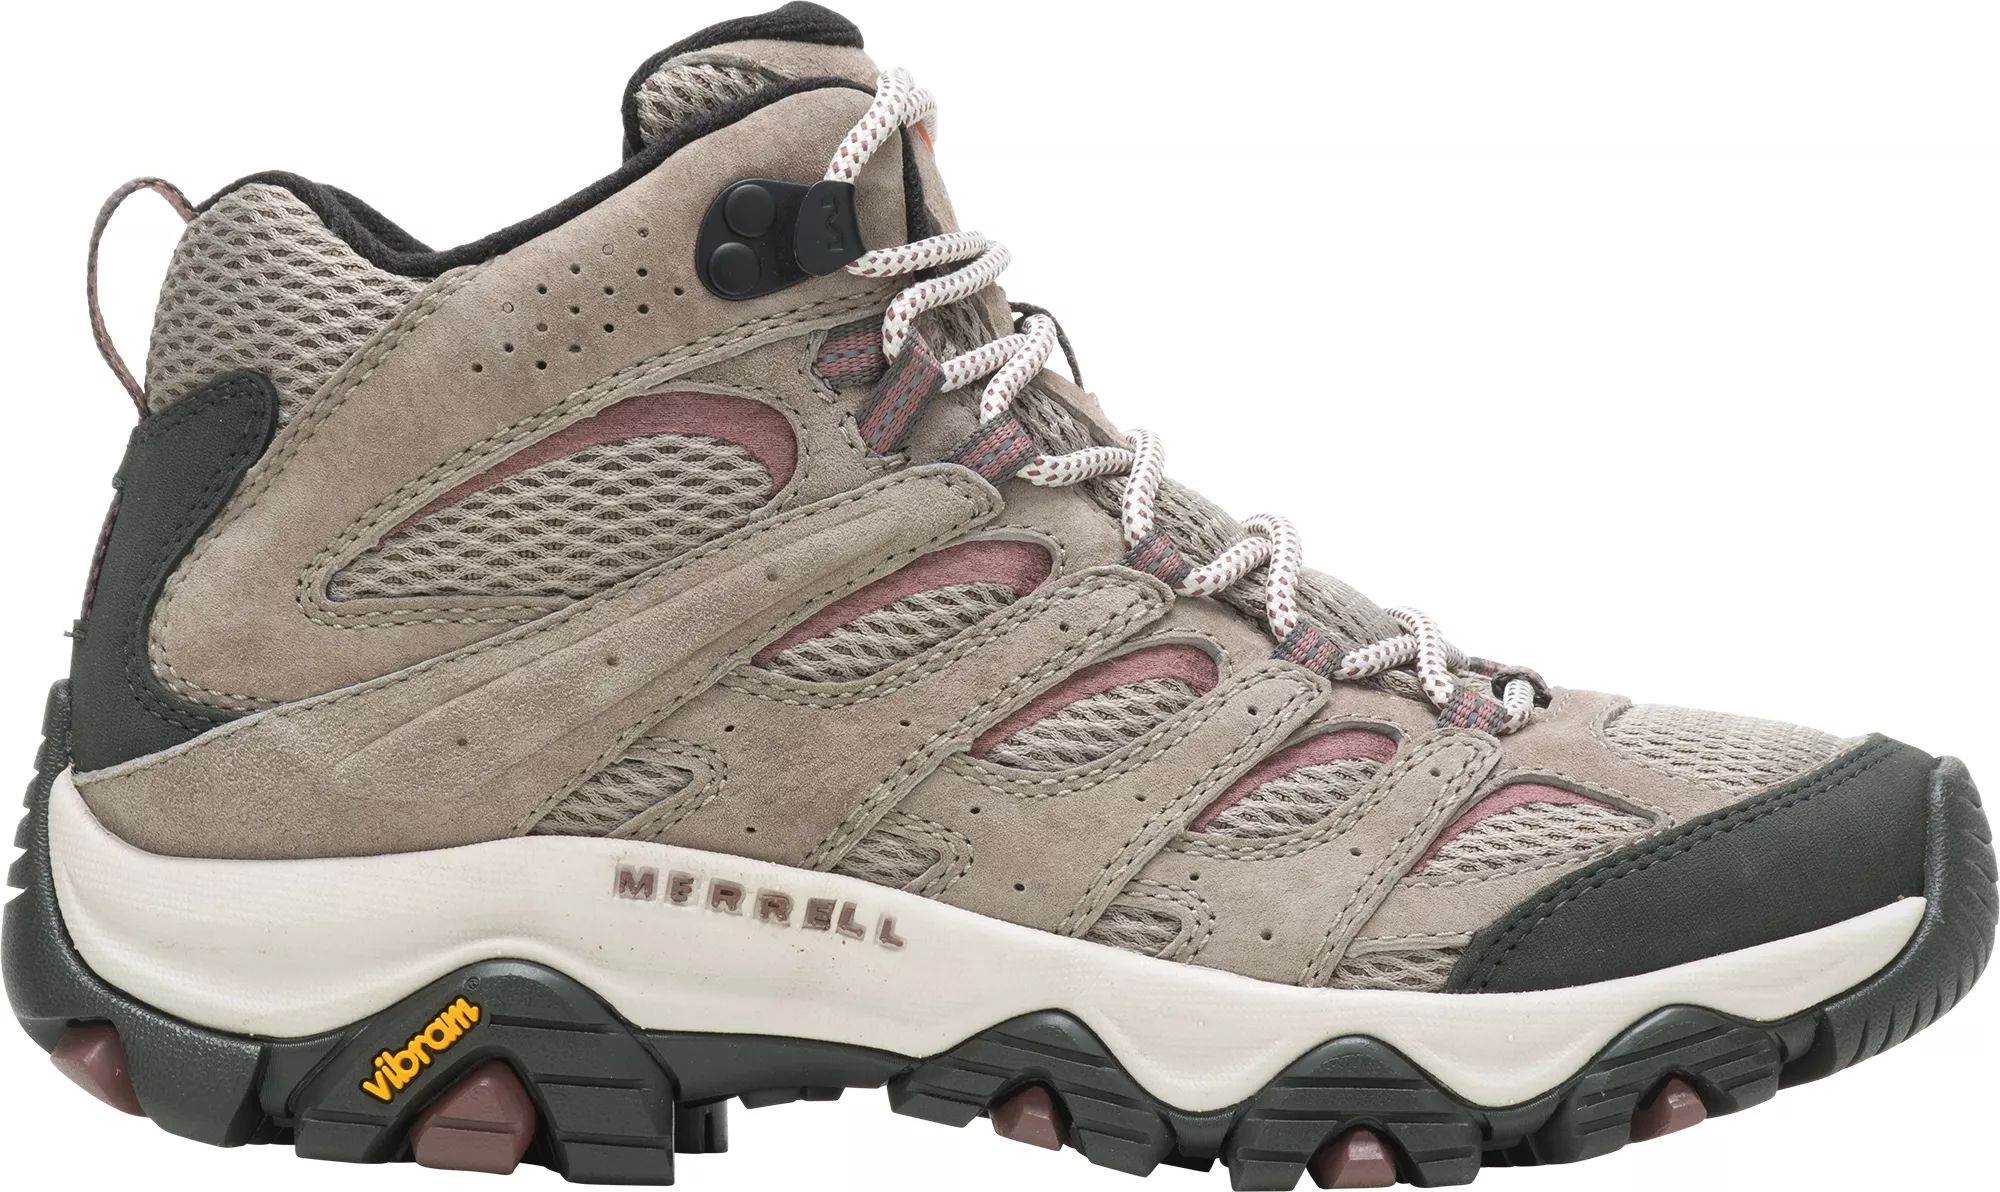 Merrell Women's Moab 3 Mid Hiking Boots, Size 5.5, Falcon | Dick's Sporting Goods